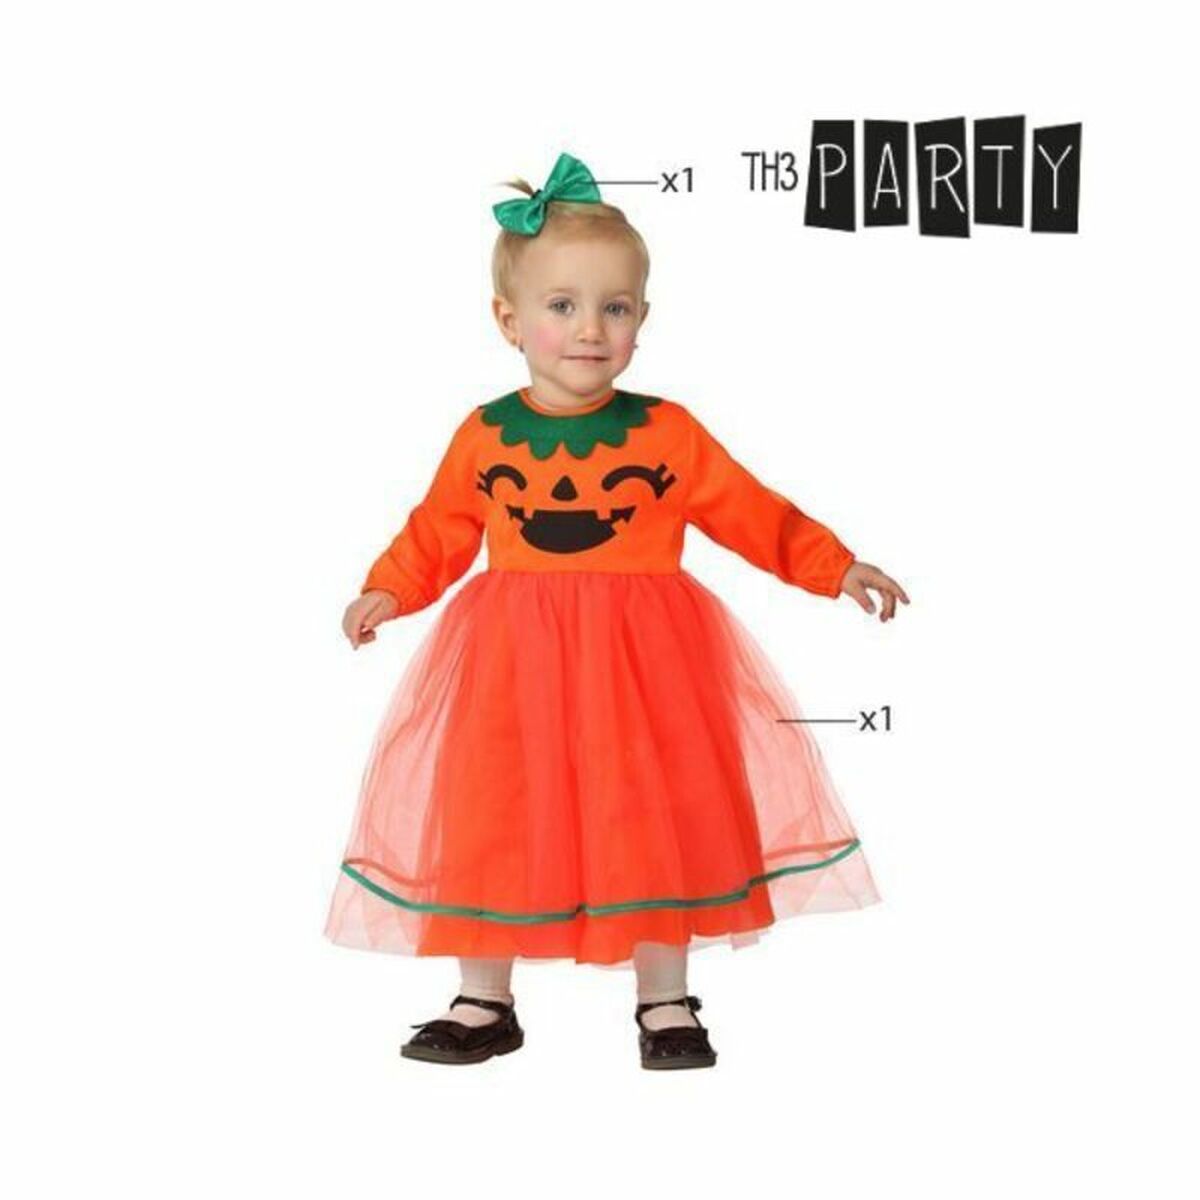 Costume for Babies Th3 Party Orange